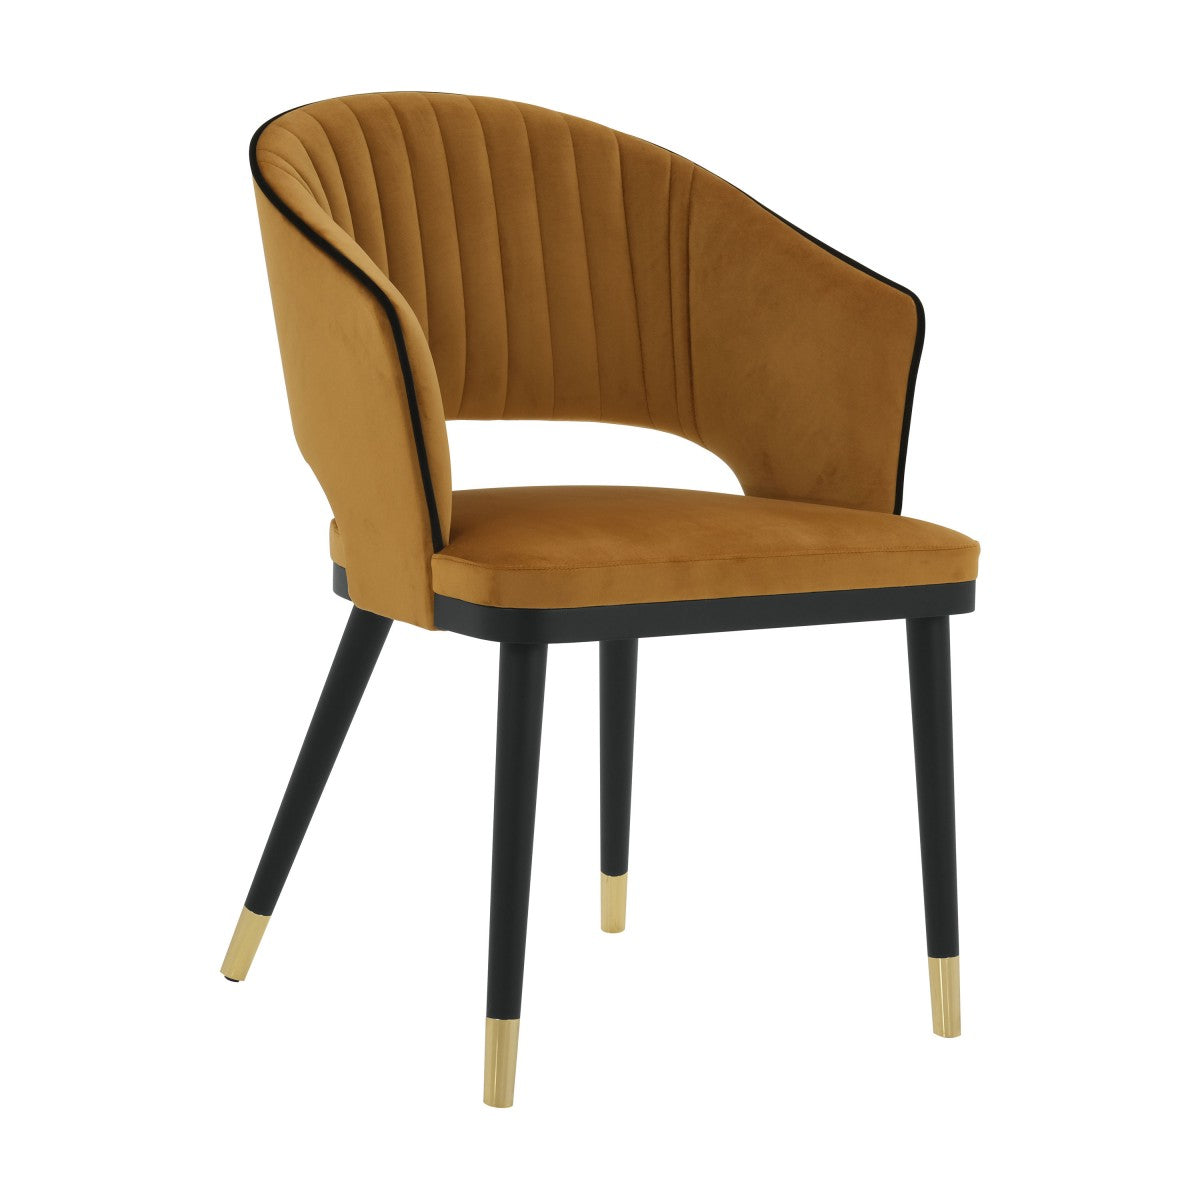 Cannes Bespoke Upholstered Modern Contemporary Dining Chair MS658S Custom Made To Order